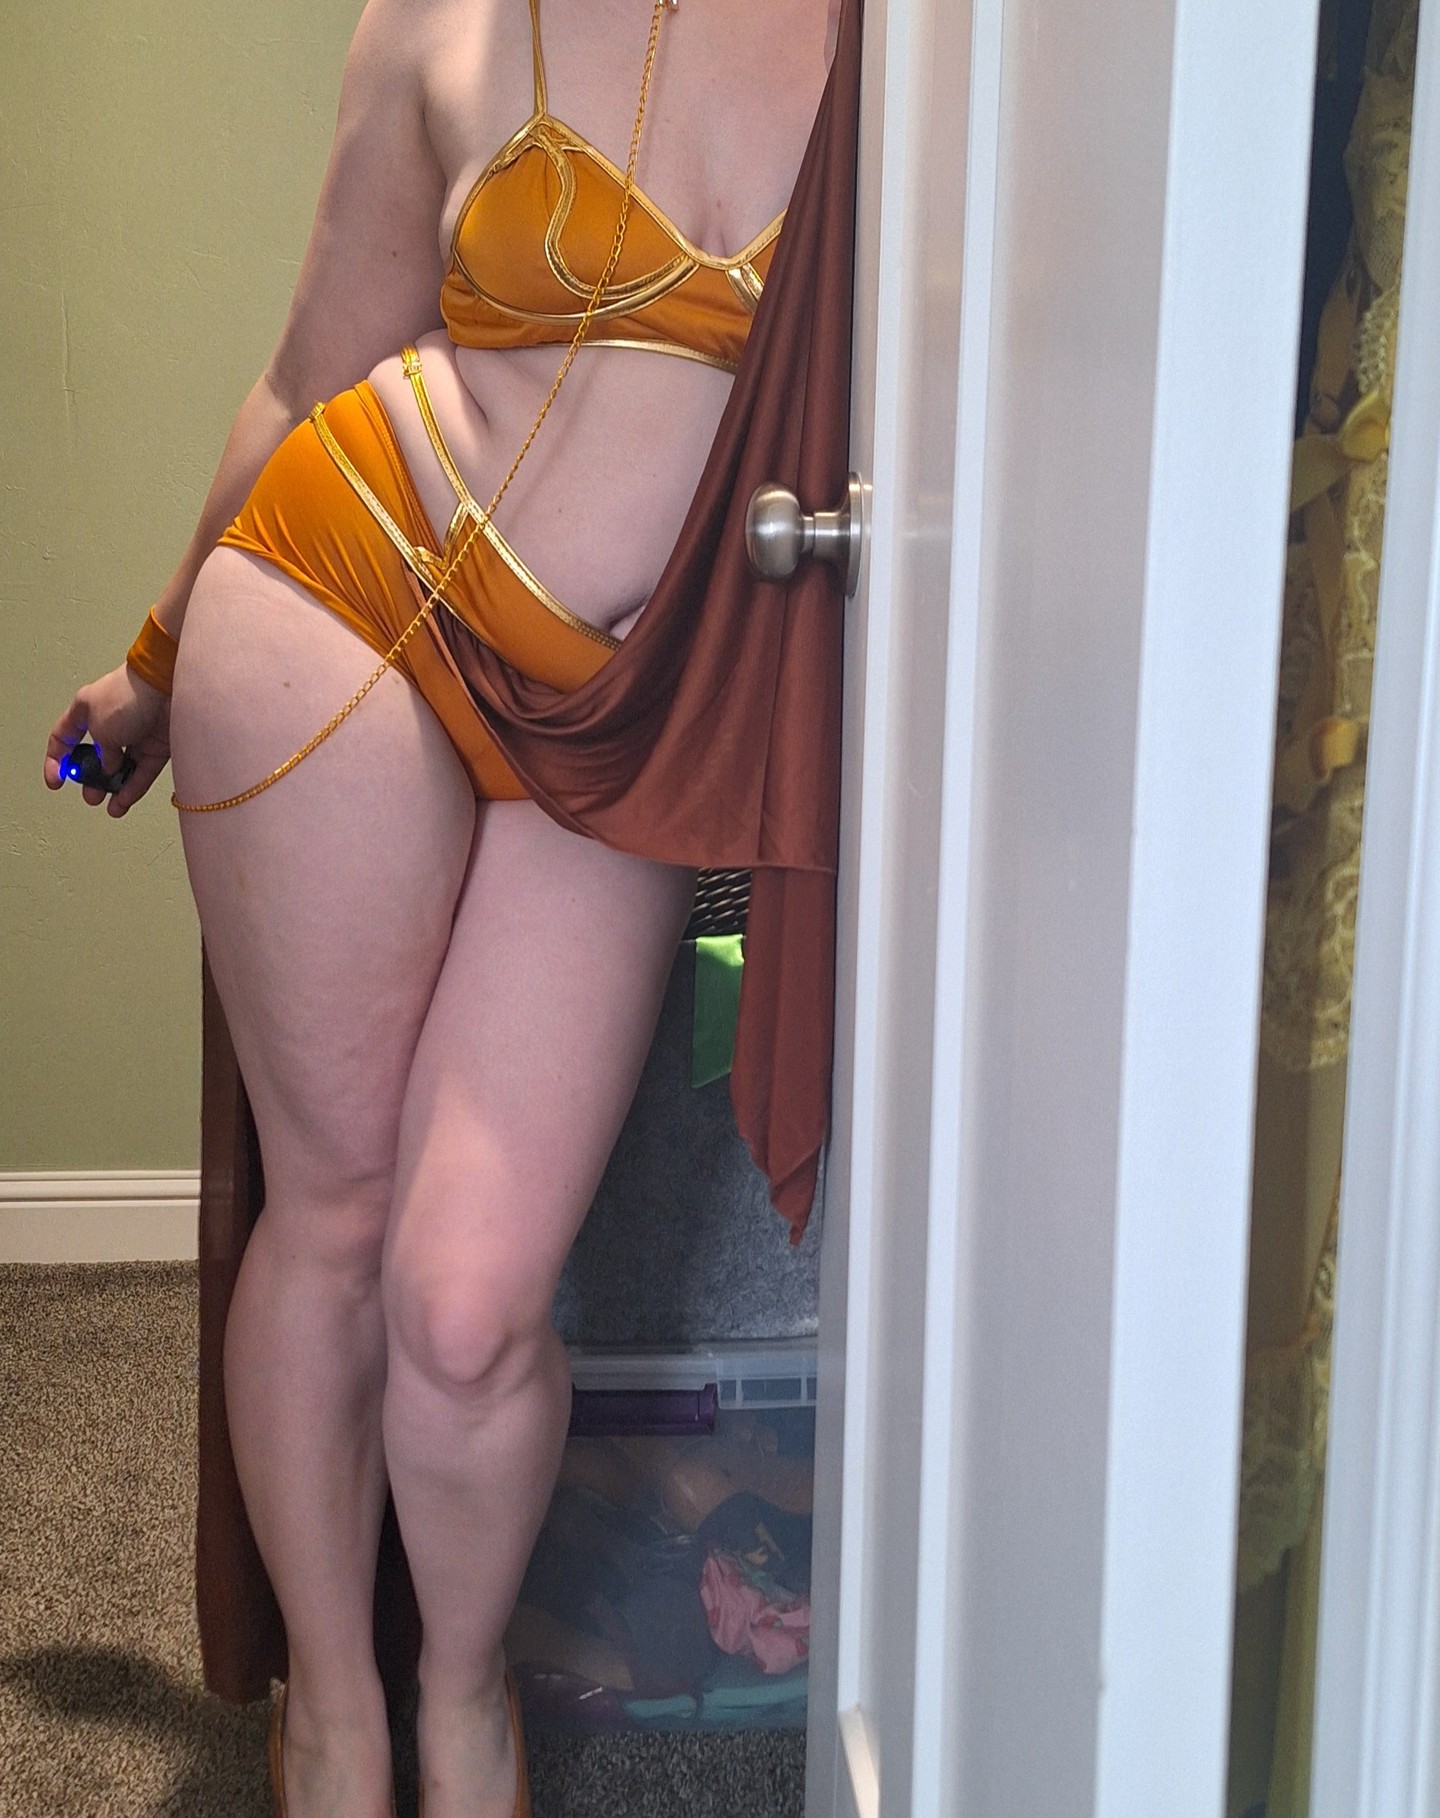 Help me be a good slave to my husband and help with organizing our closet. It's a mess as you can see. https://linktr.ee/amyparadise
#adult  #onlyfans #starwars